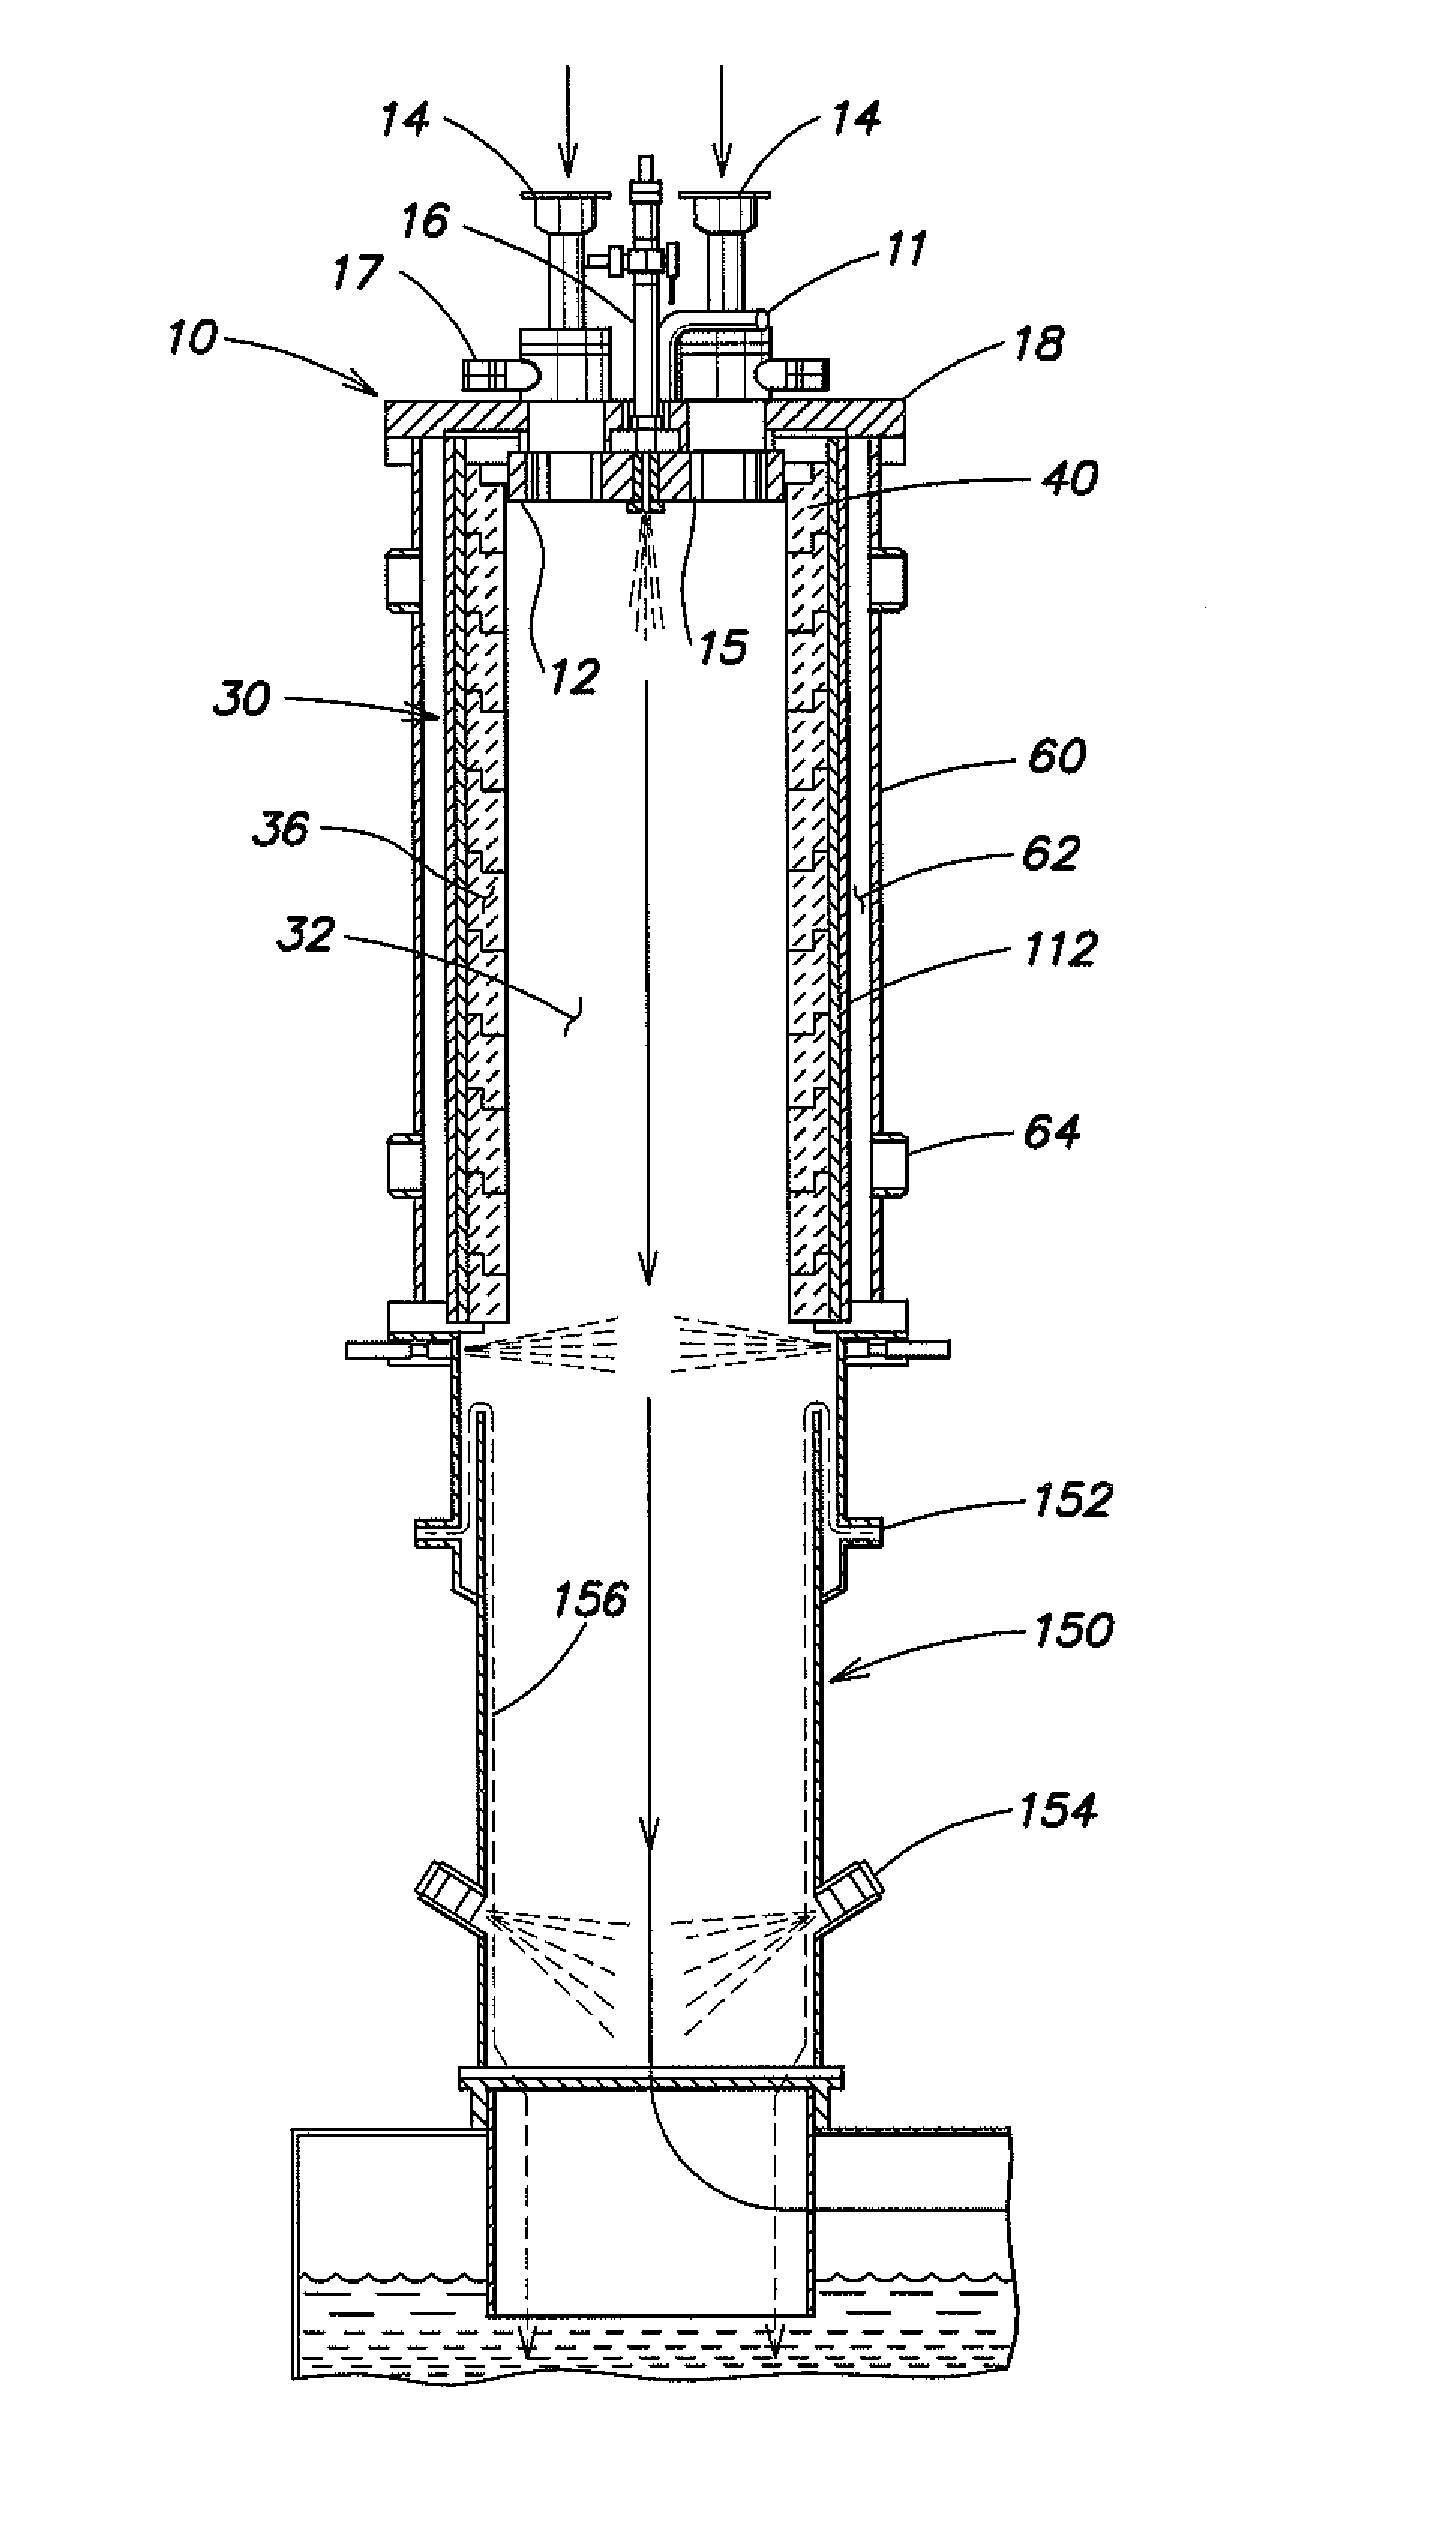 Methods and apparatus for selectively coupling process tools to abatement reactors